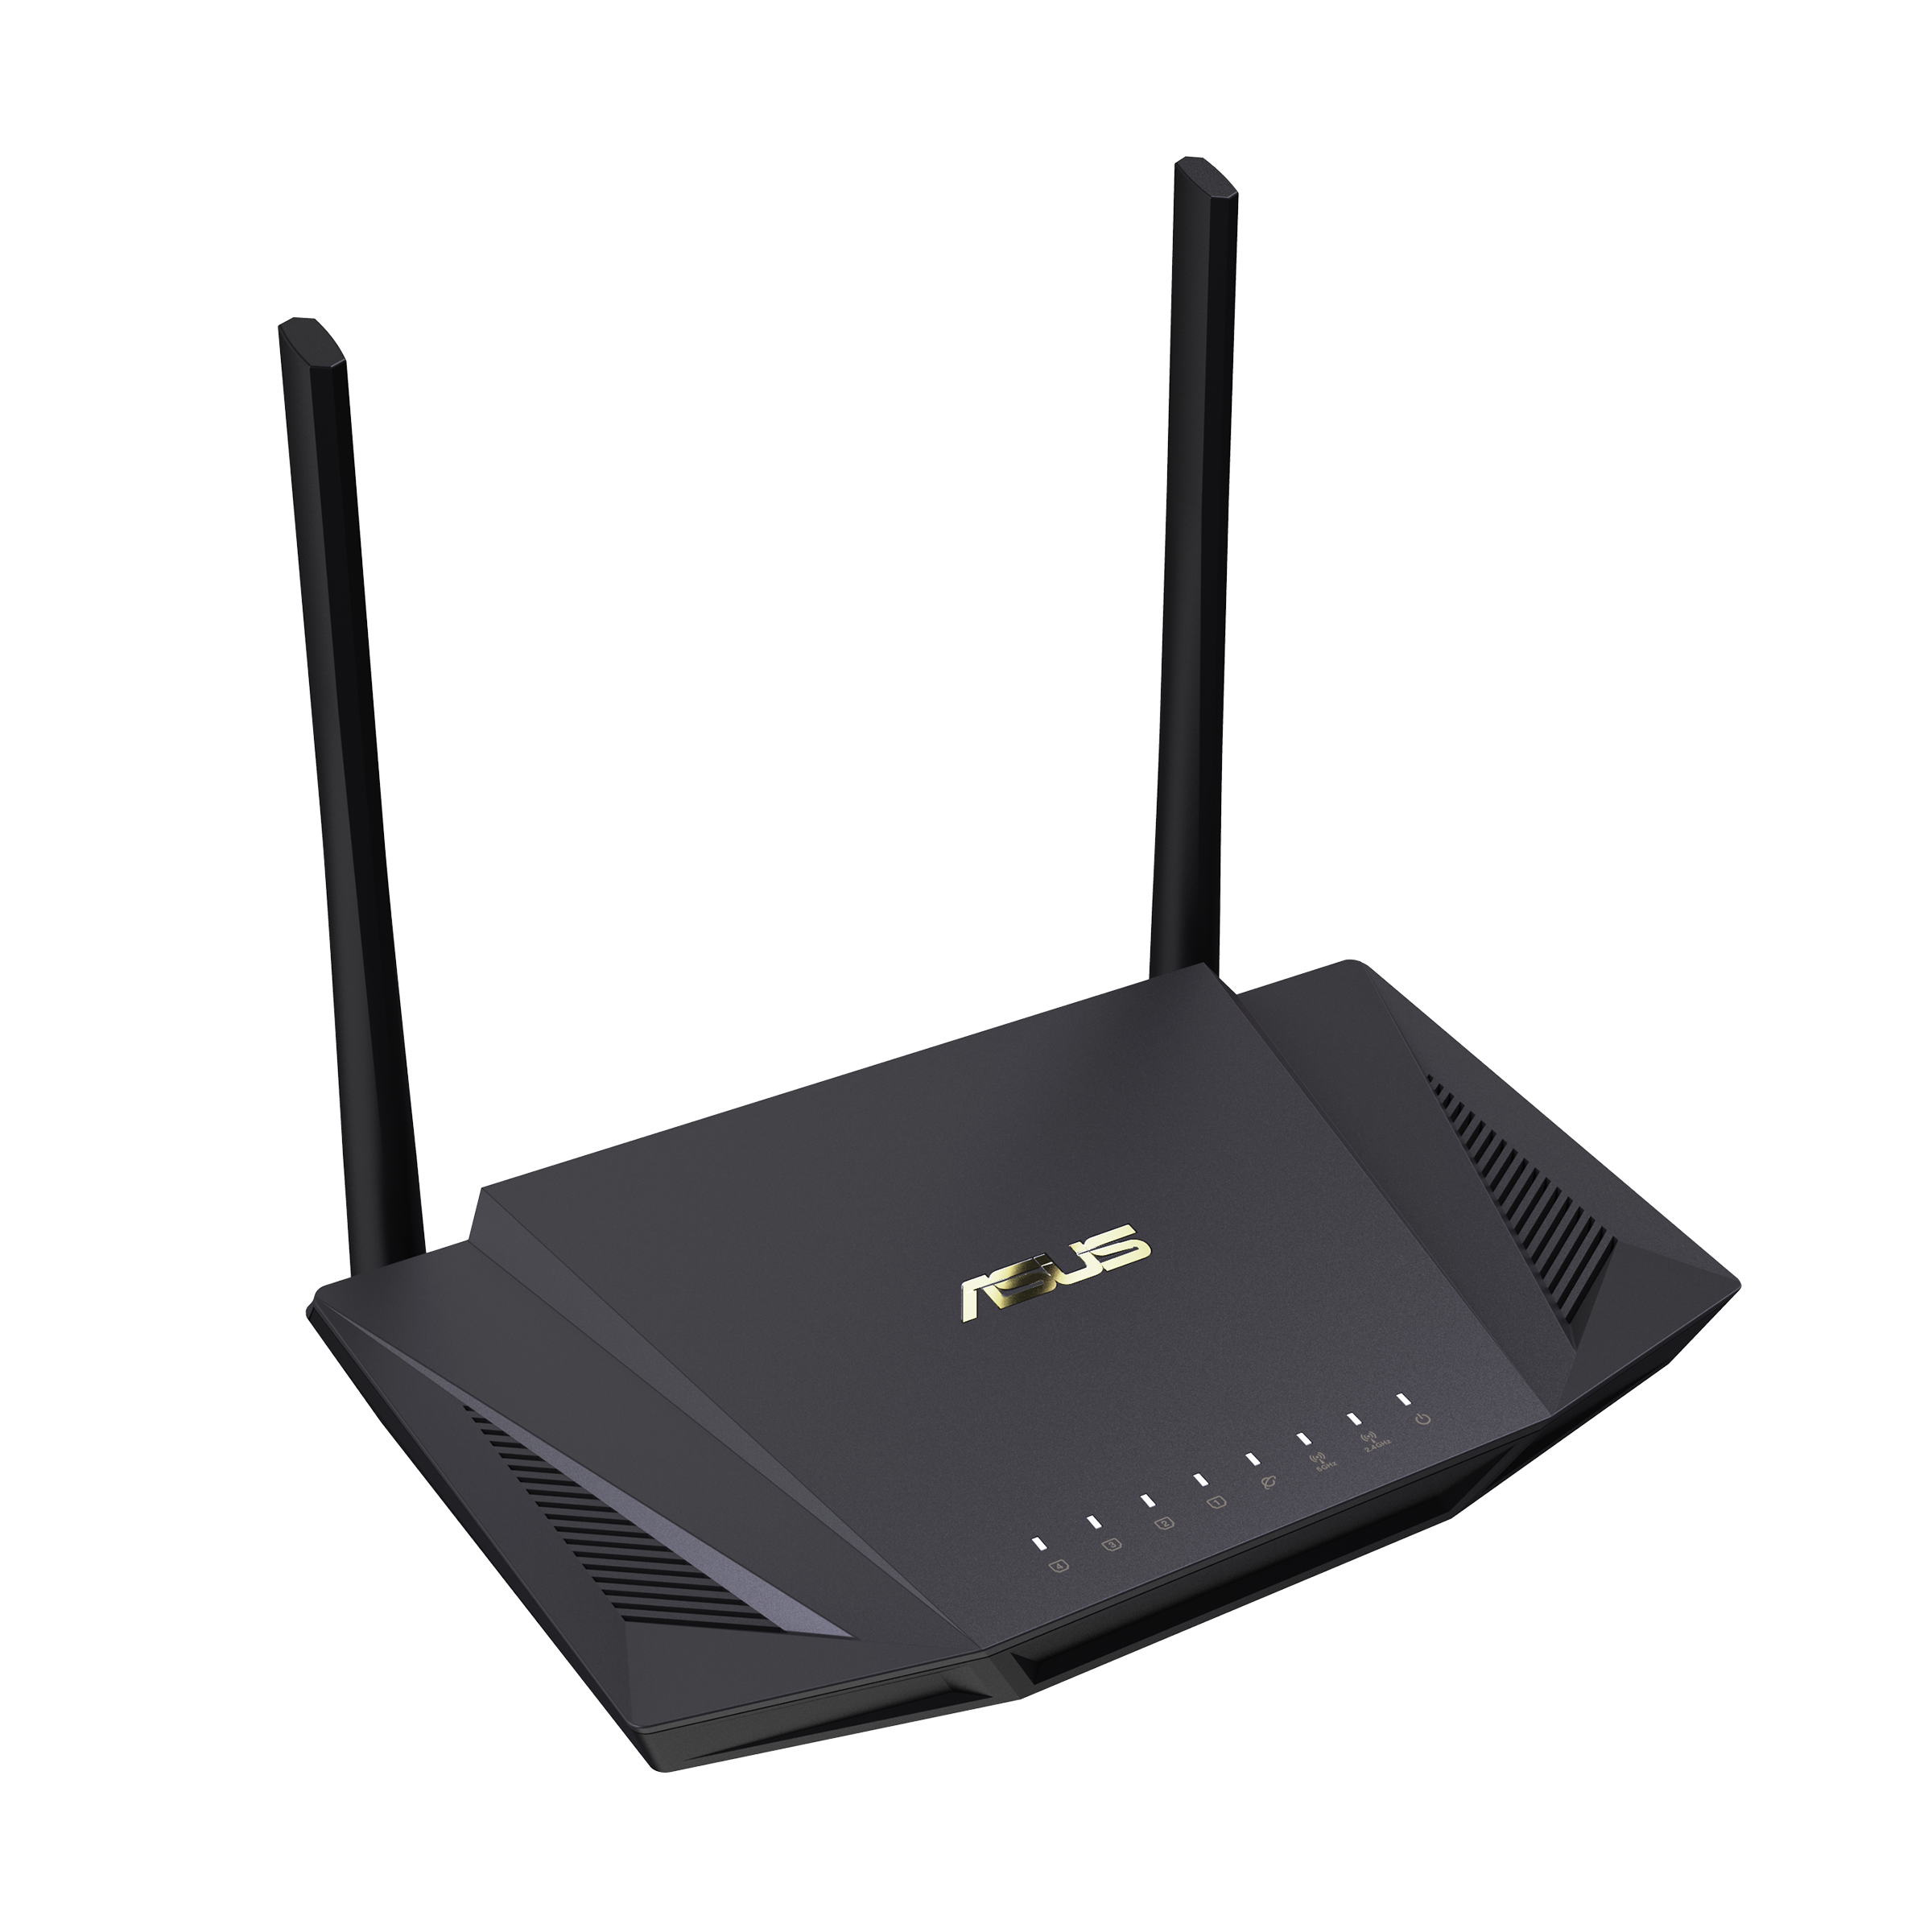 RT-AX56U｜WiFi Routers｜ASUS USA